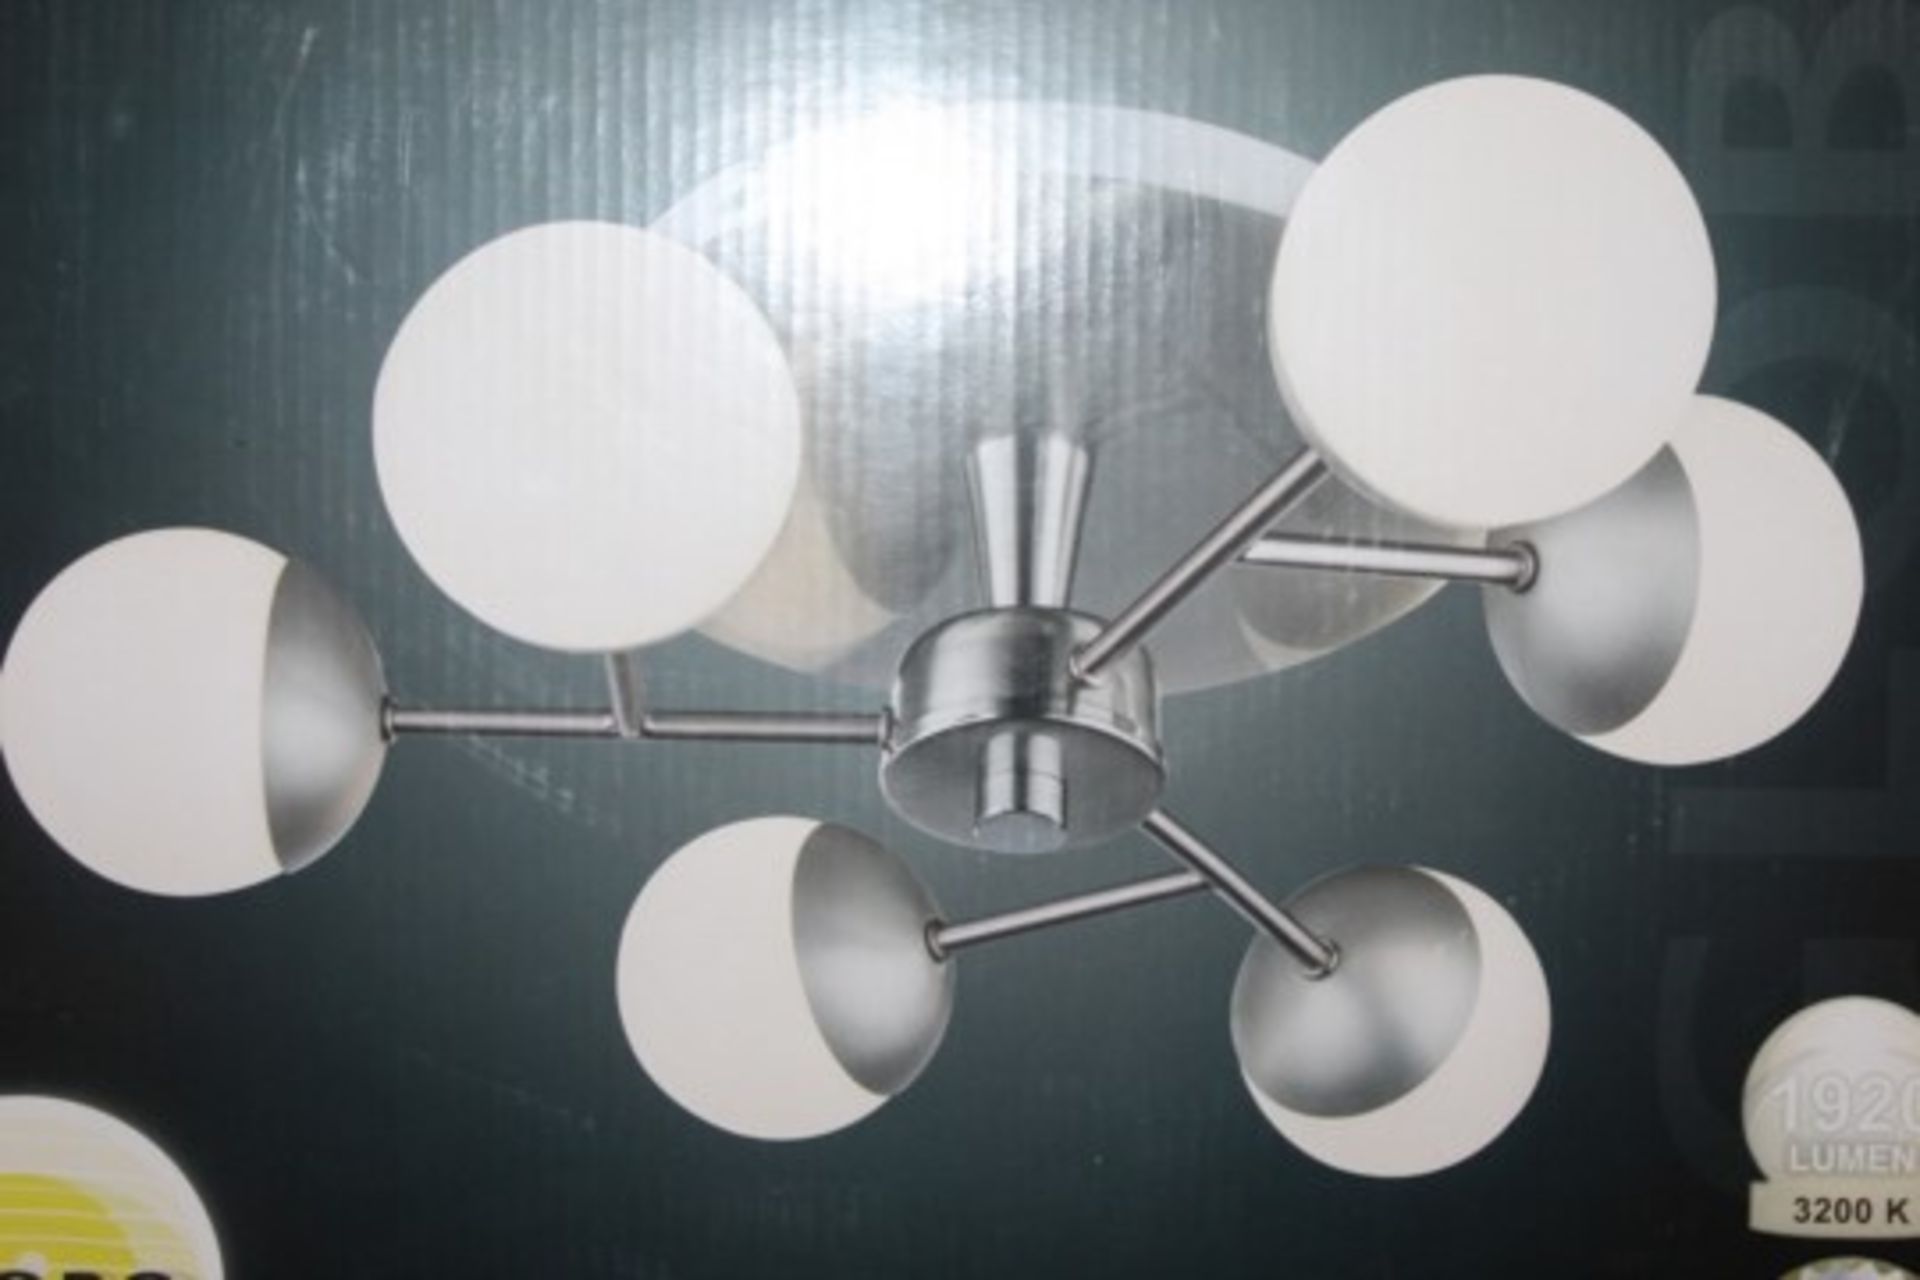 Globo LED 6 Light Ceiling Lights RRP £120 (Appraisals Available Upon Request)